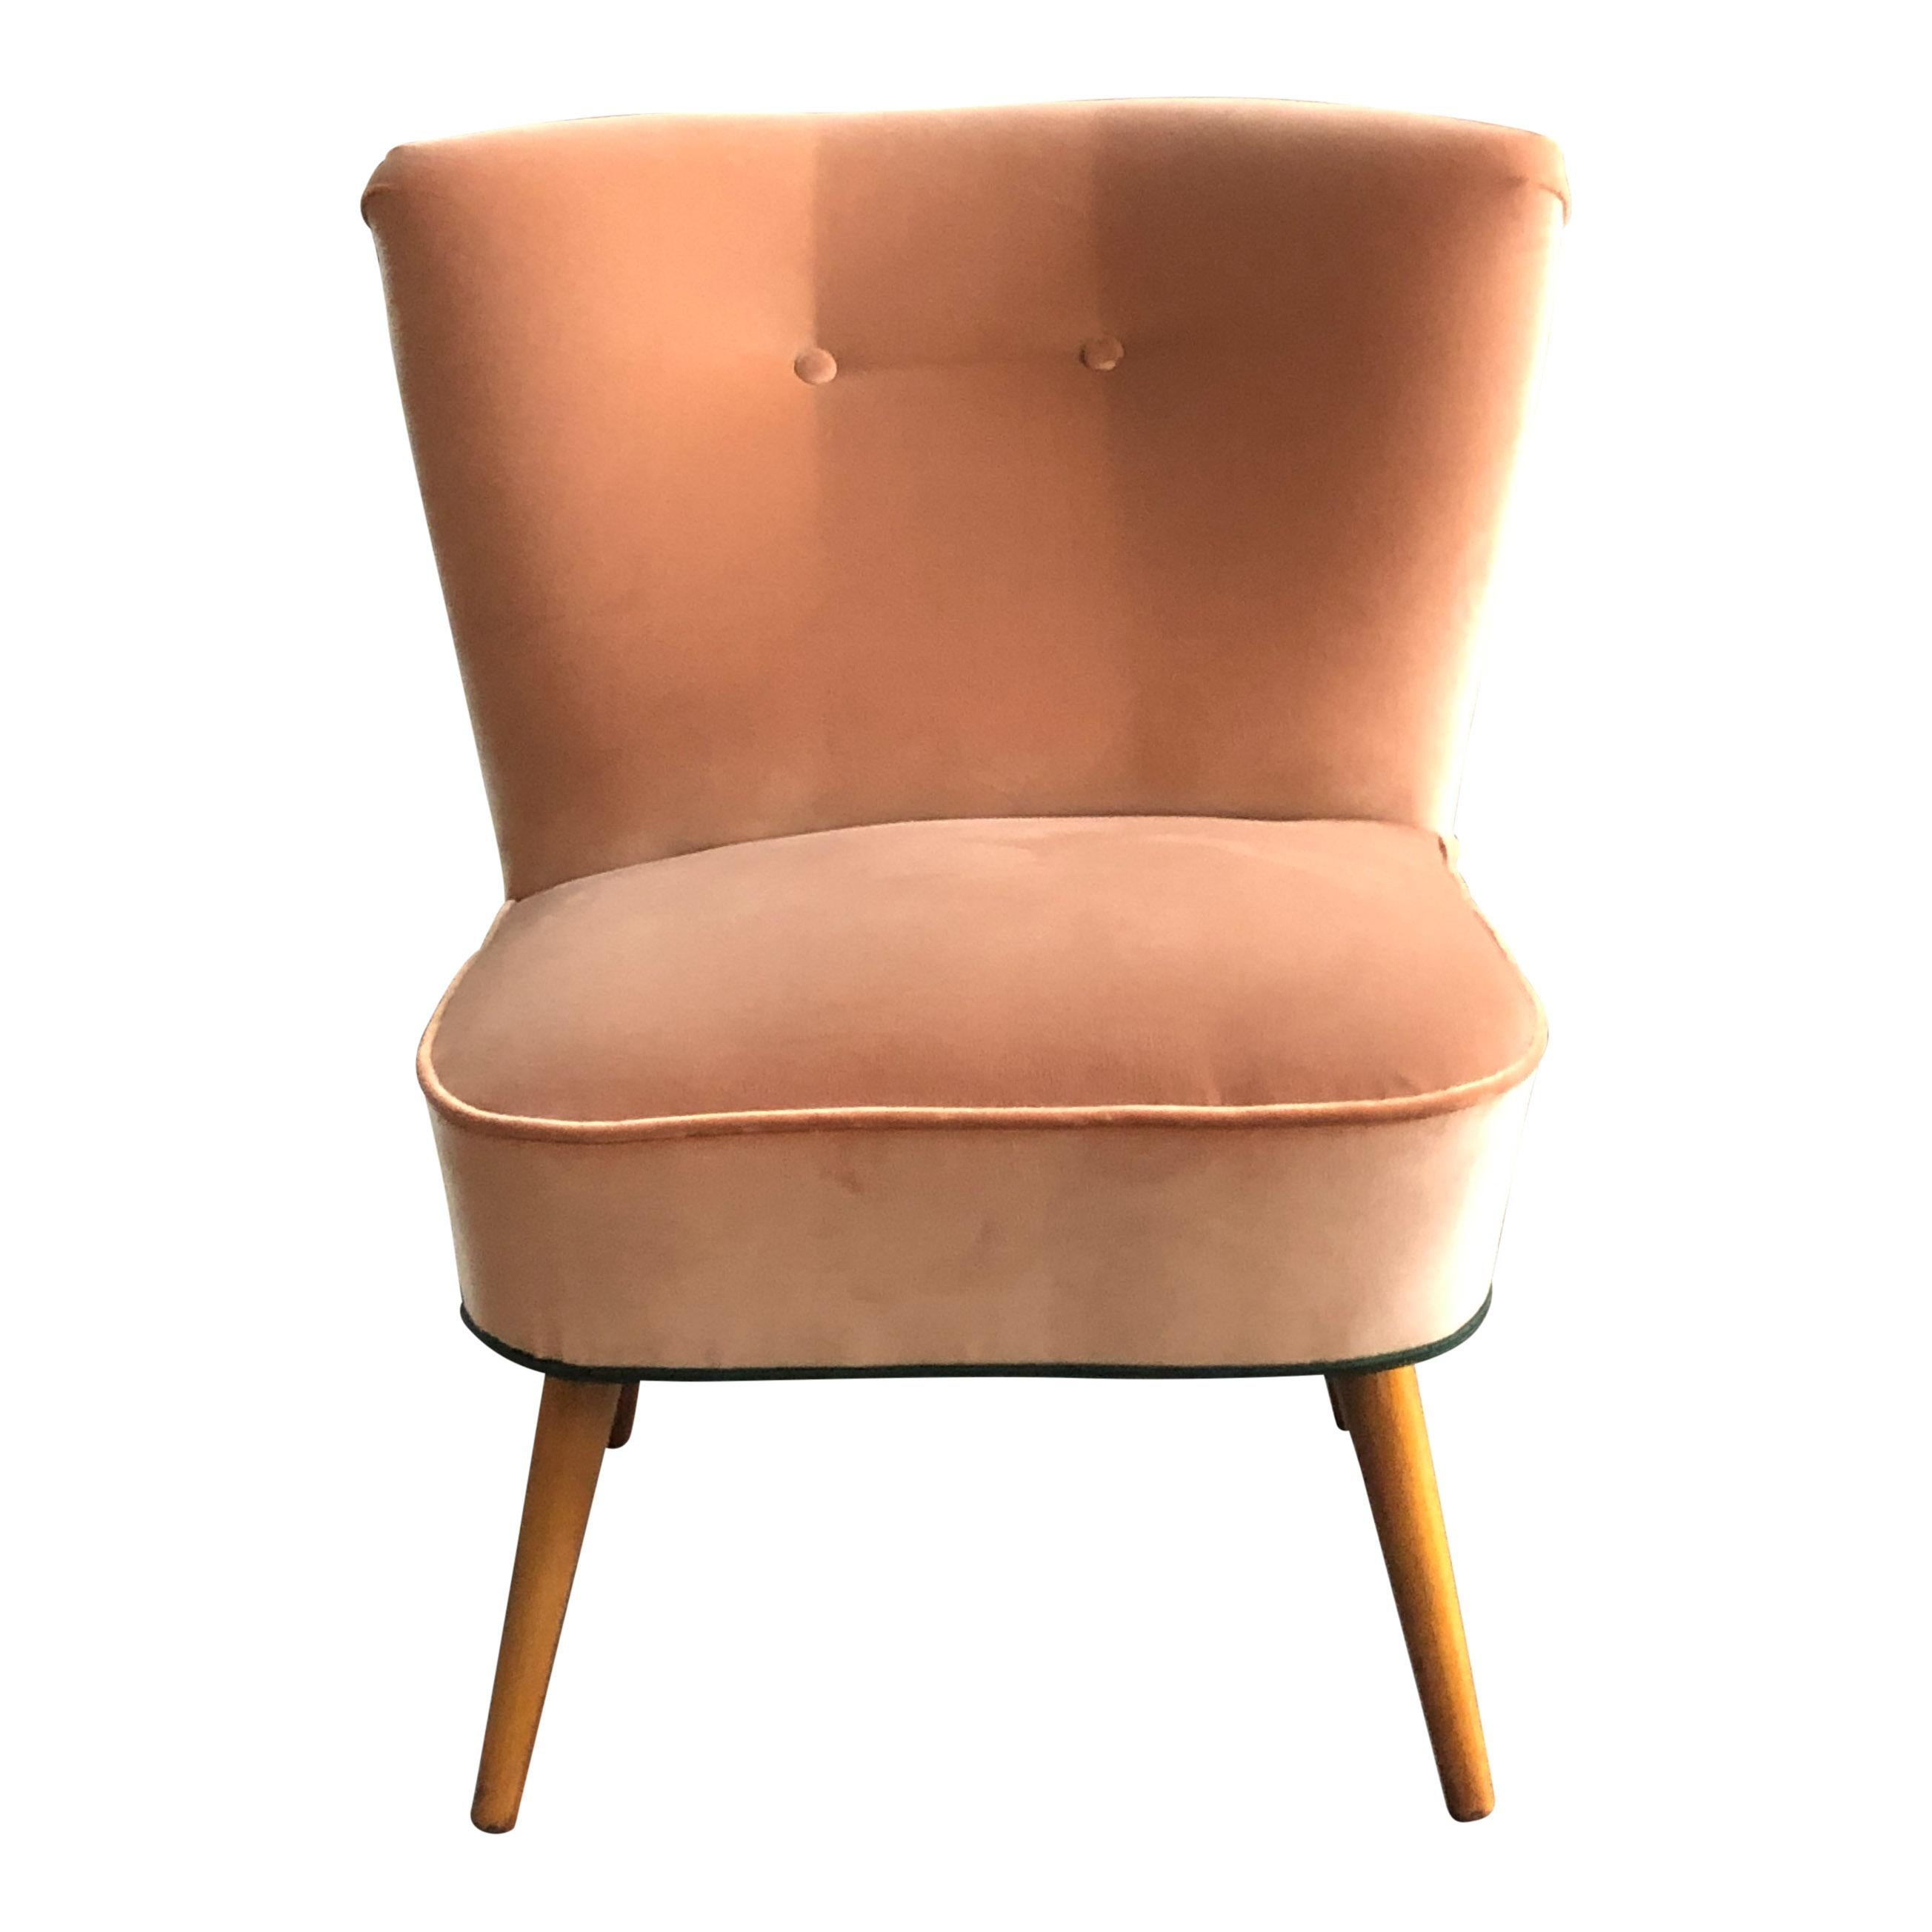 After the sober 1940s, there was a return to economic prosperity and optimism in the years thereafter. This was also seen in the development of furniture. This chair is a good example of this period. It is a so called cocktail/club chair from the